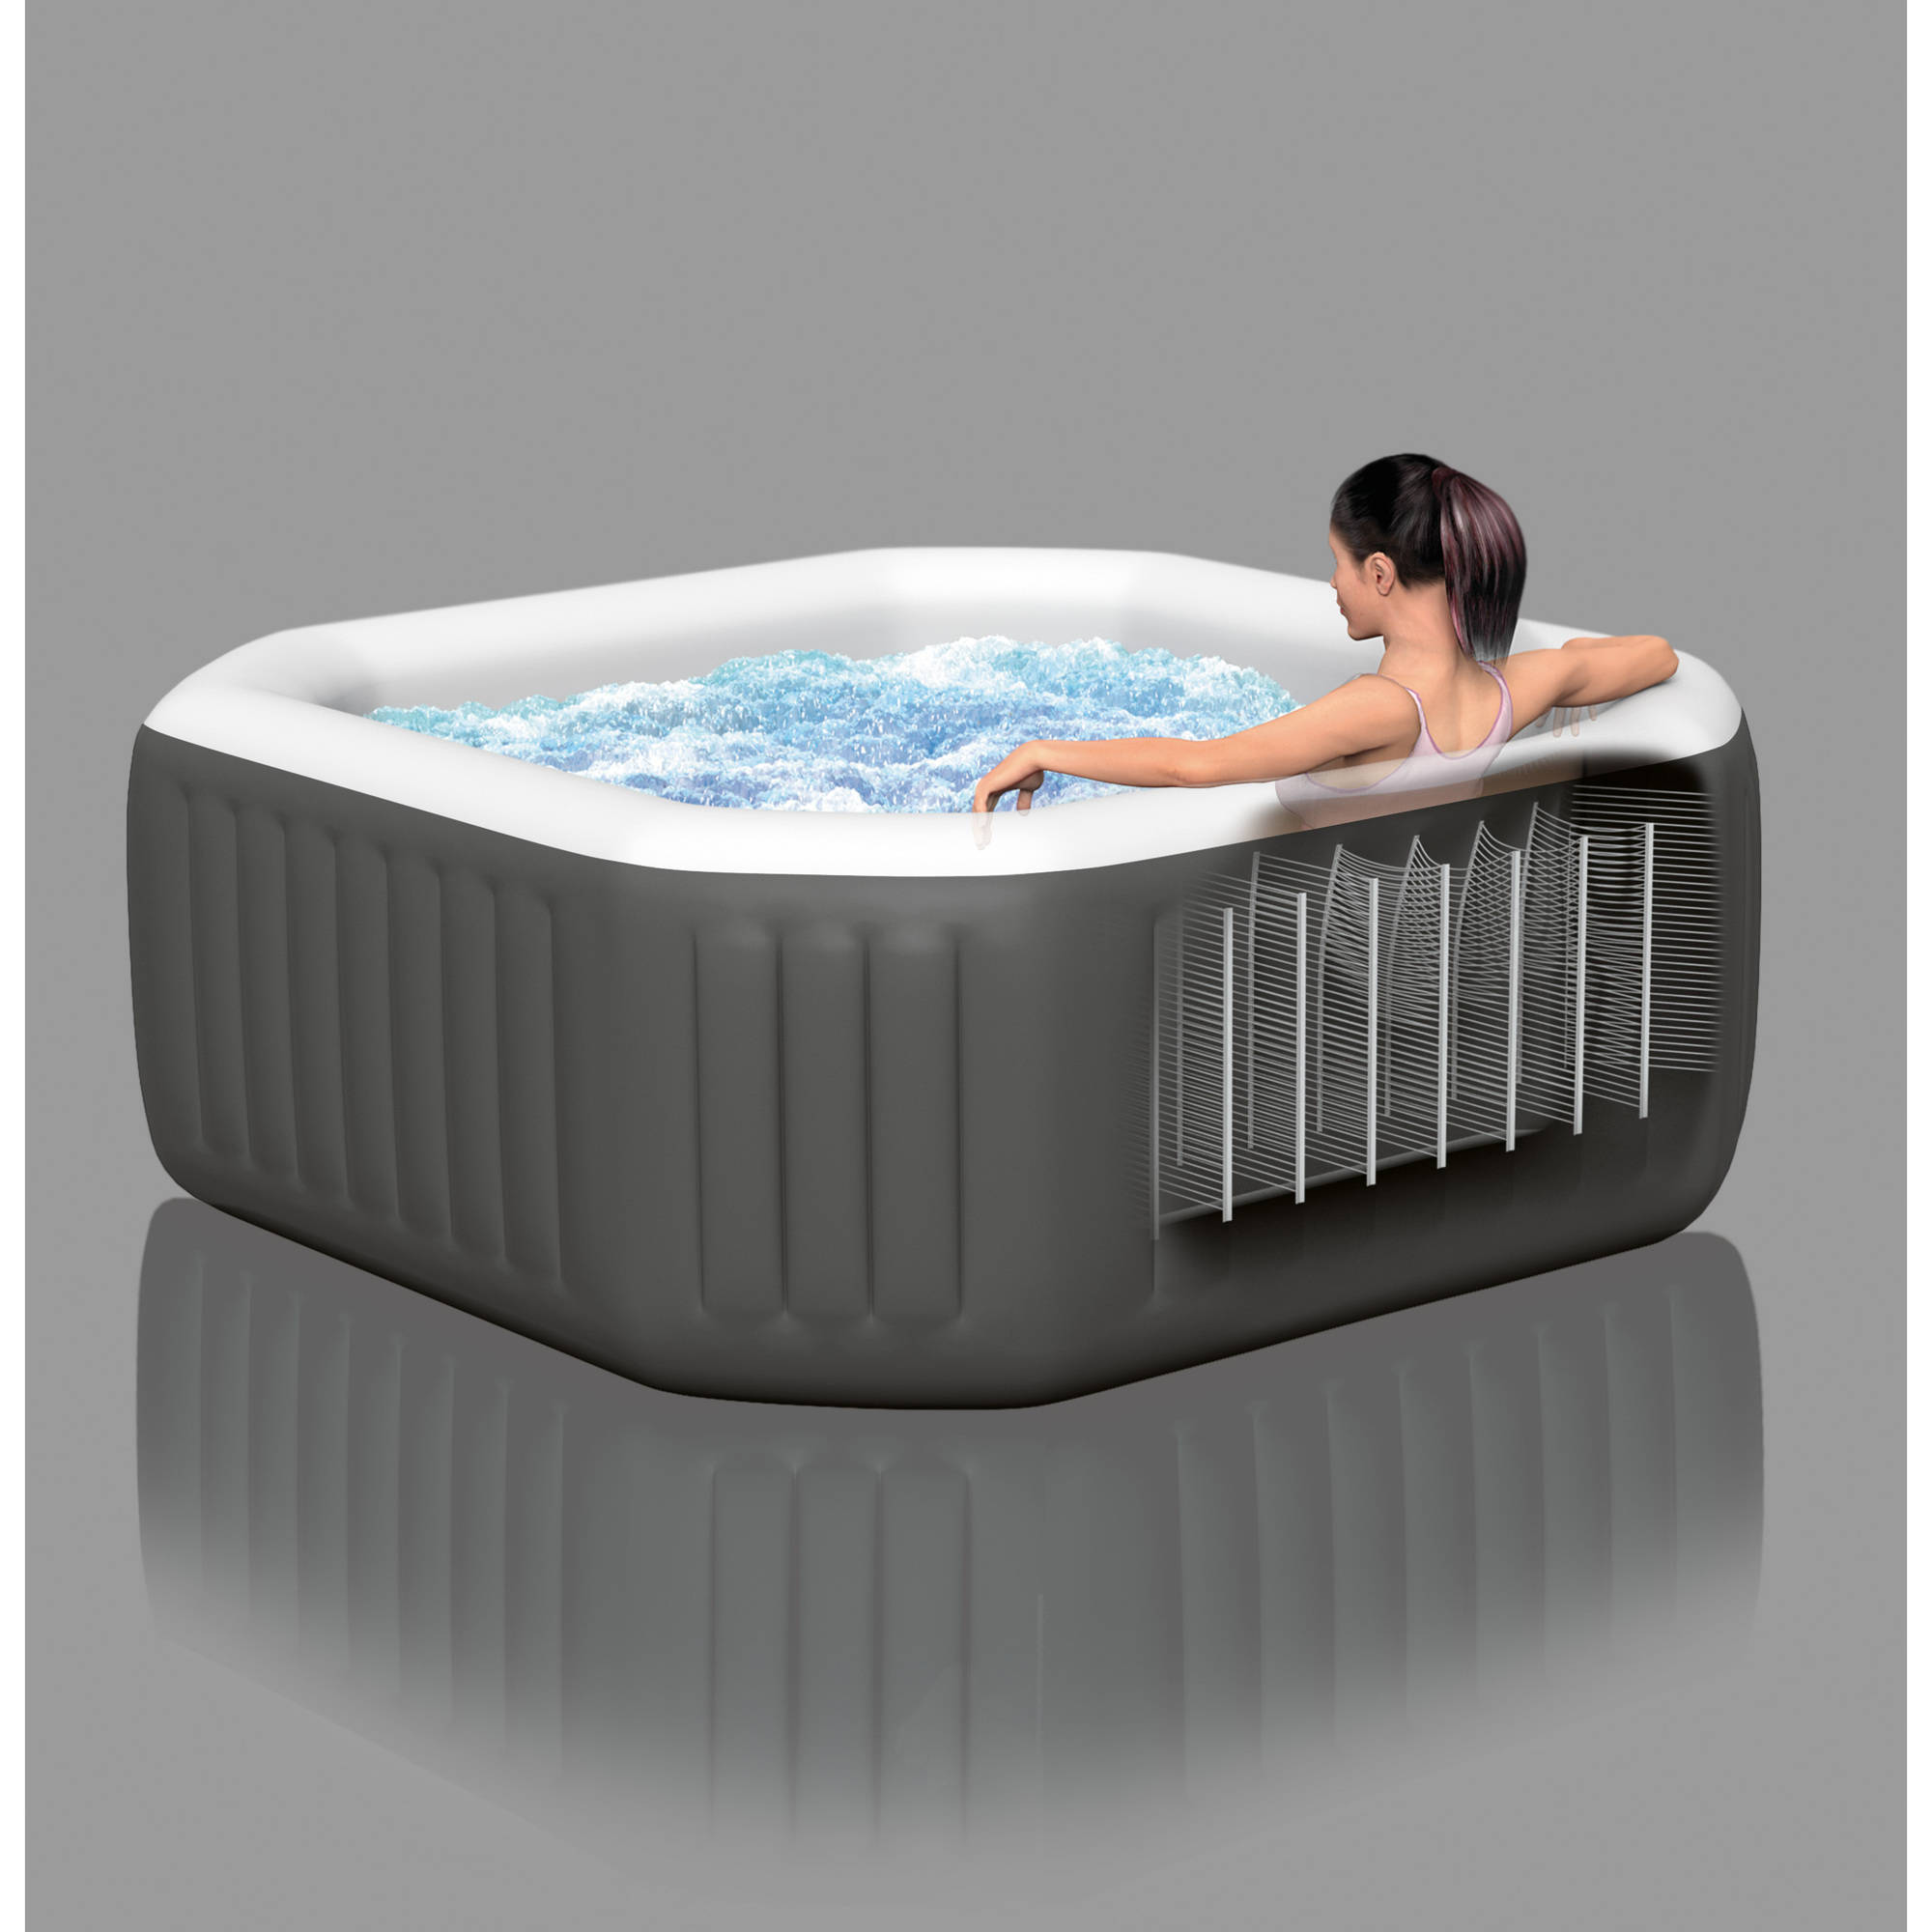 Intex 120 Bubble Jets 4-Person Octagonal Portable Inflatable Hot Tub Spa, Gray - image 5 of 9